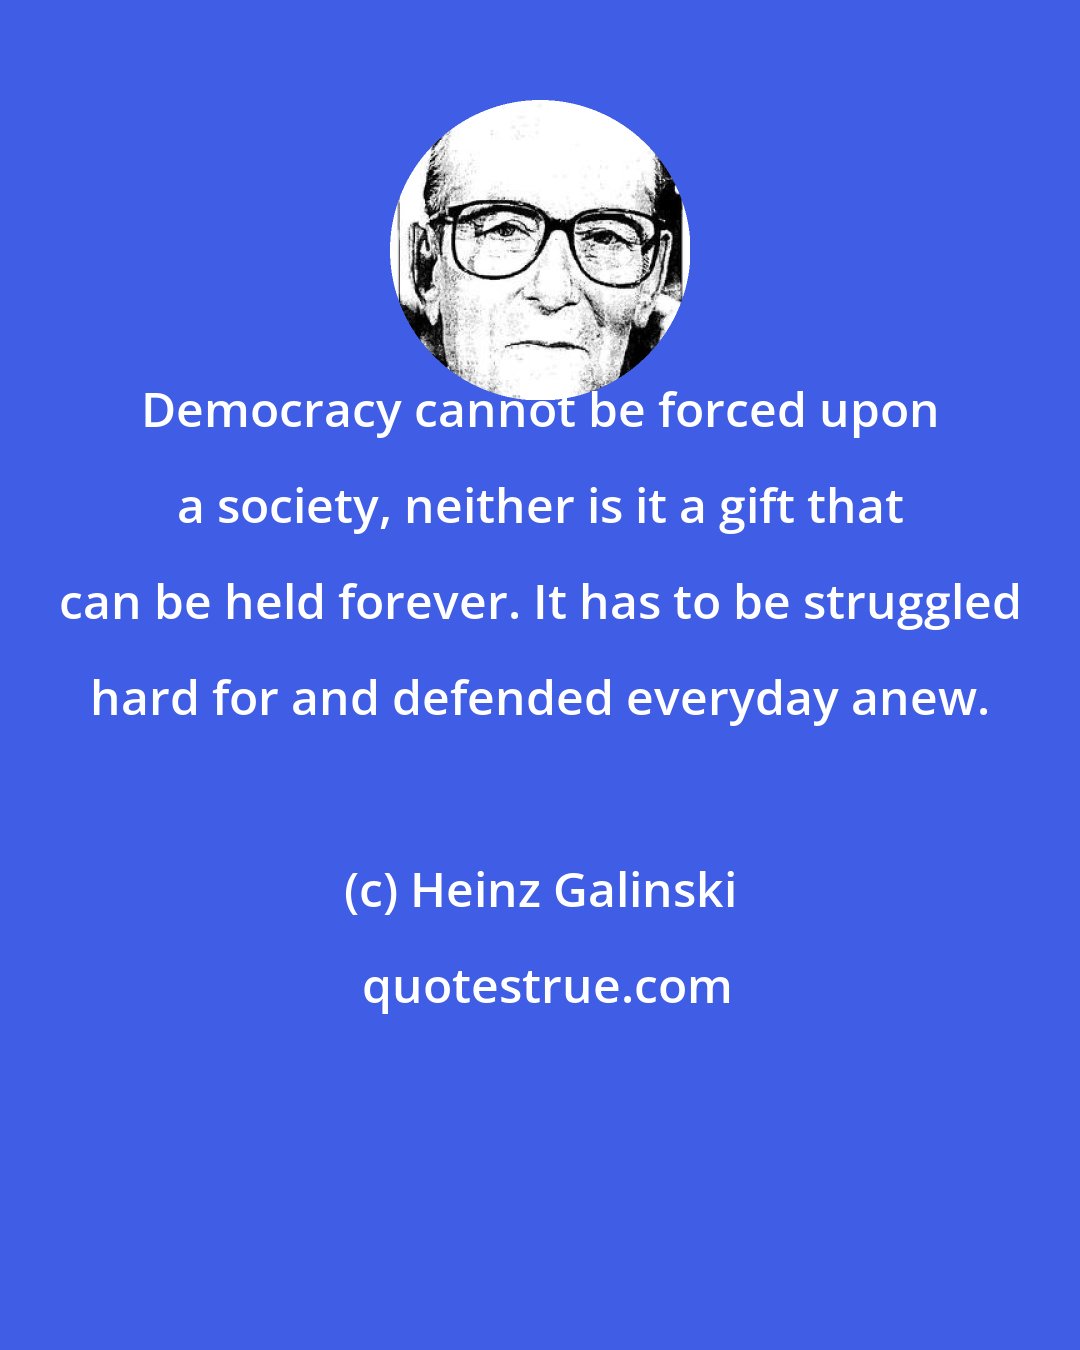 Heinz Galinski: Democracy cannot be forced upon a society, neither is it a gift that can be held forever. It has to be struggled hard for and defended everyday anew.